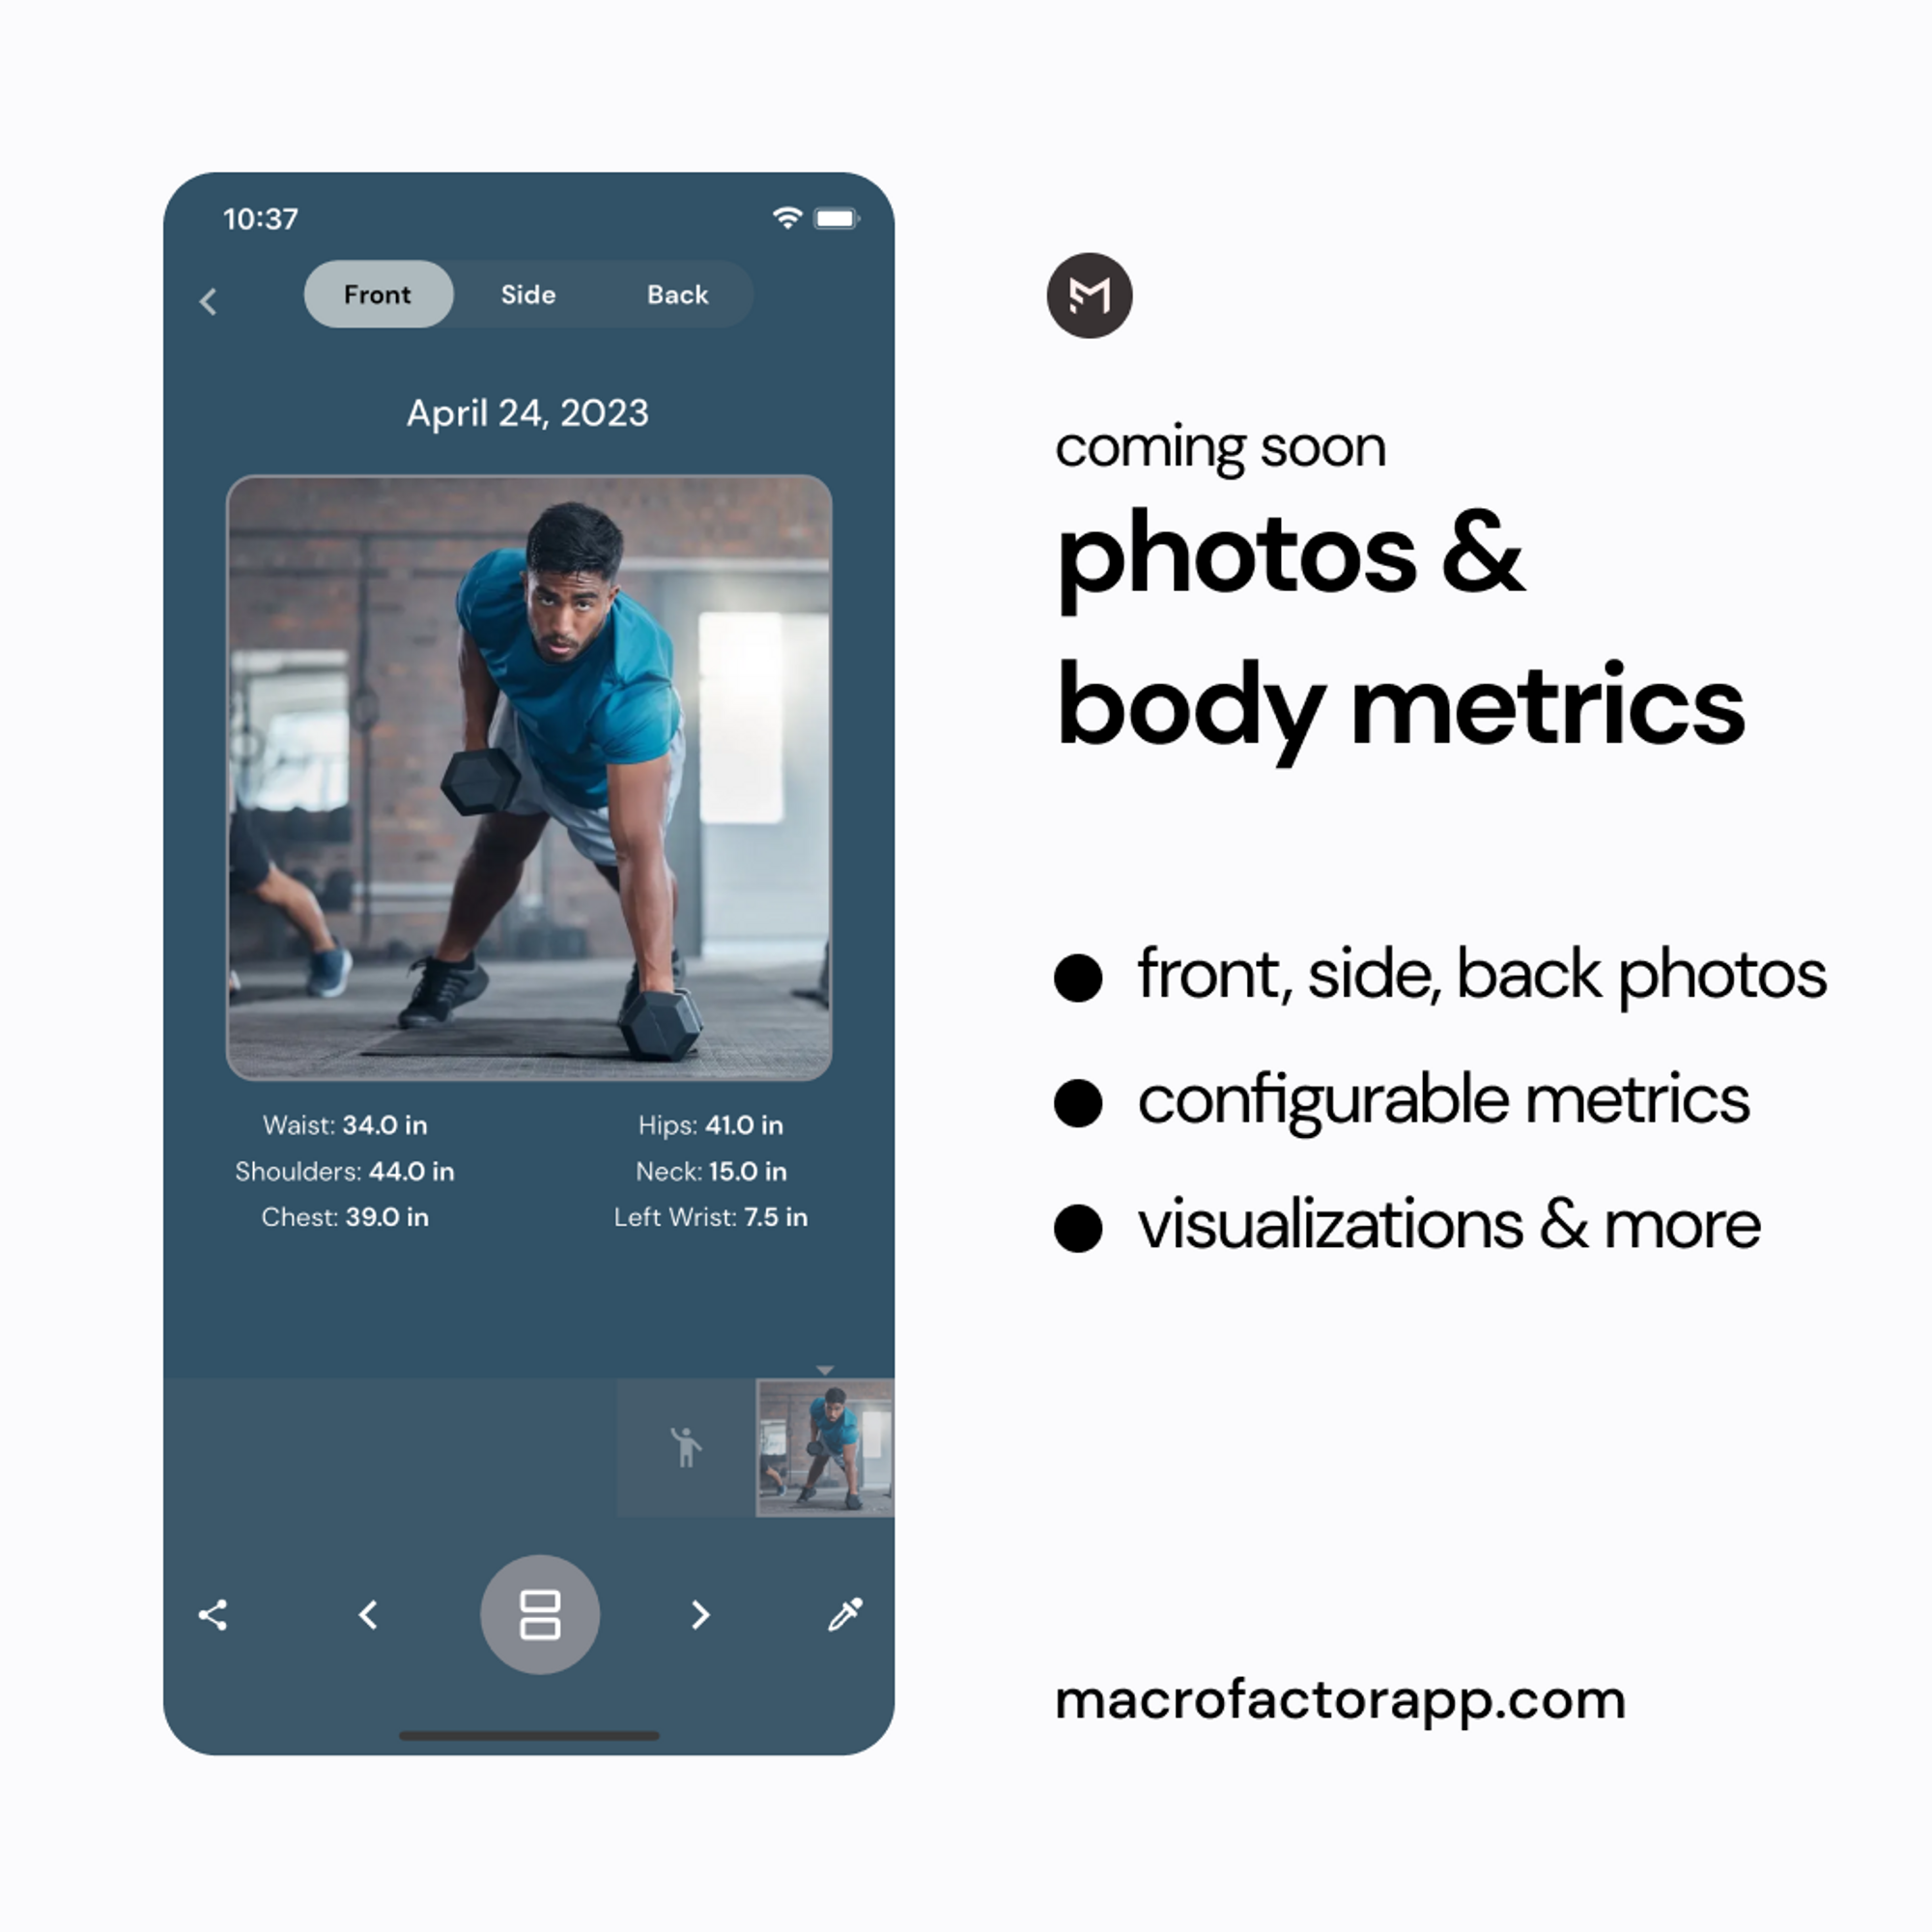 photos and body metrics features coming soon